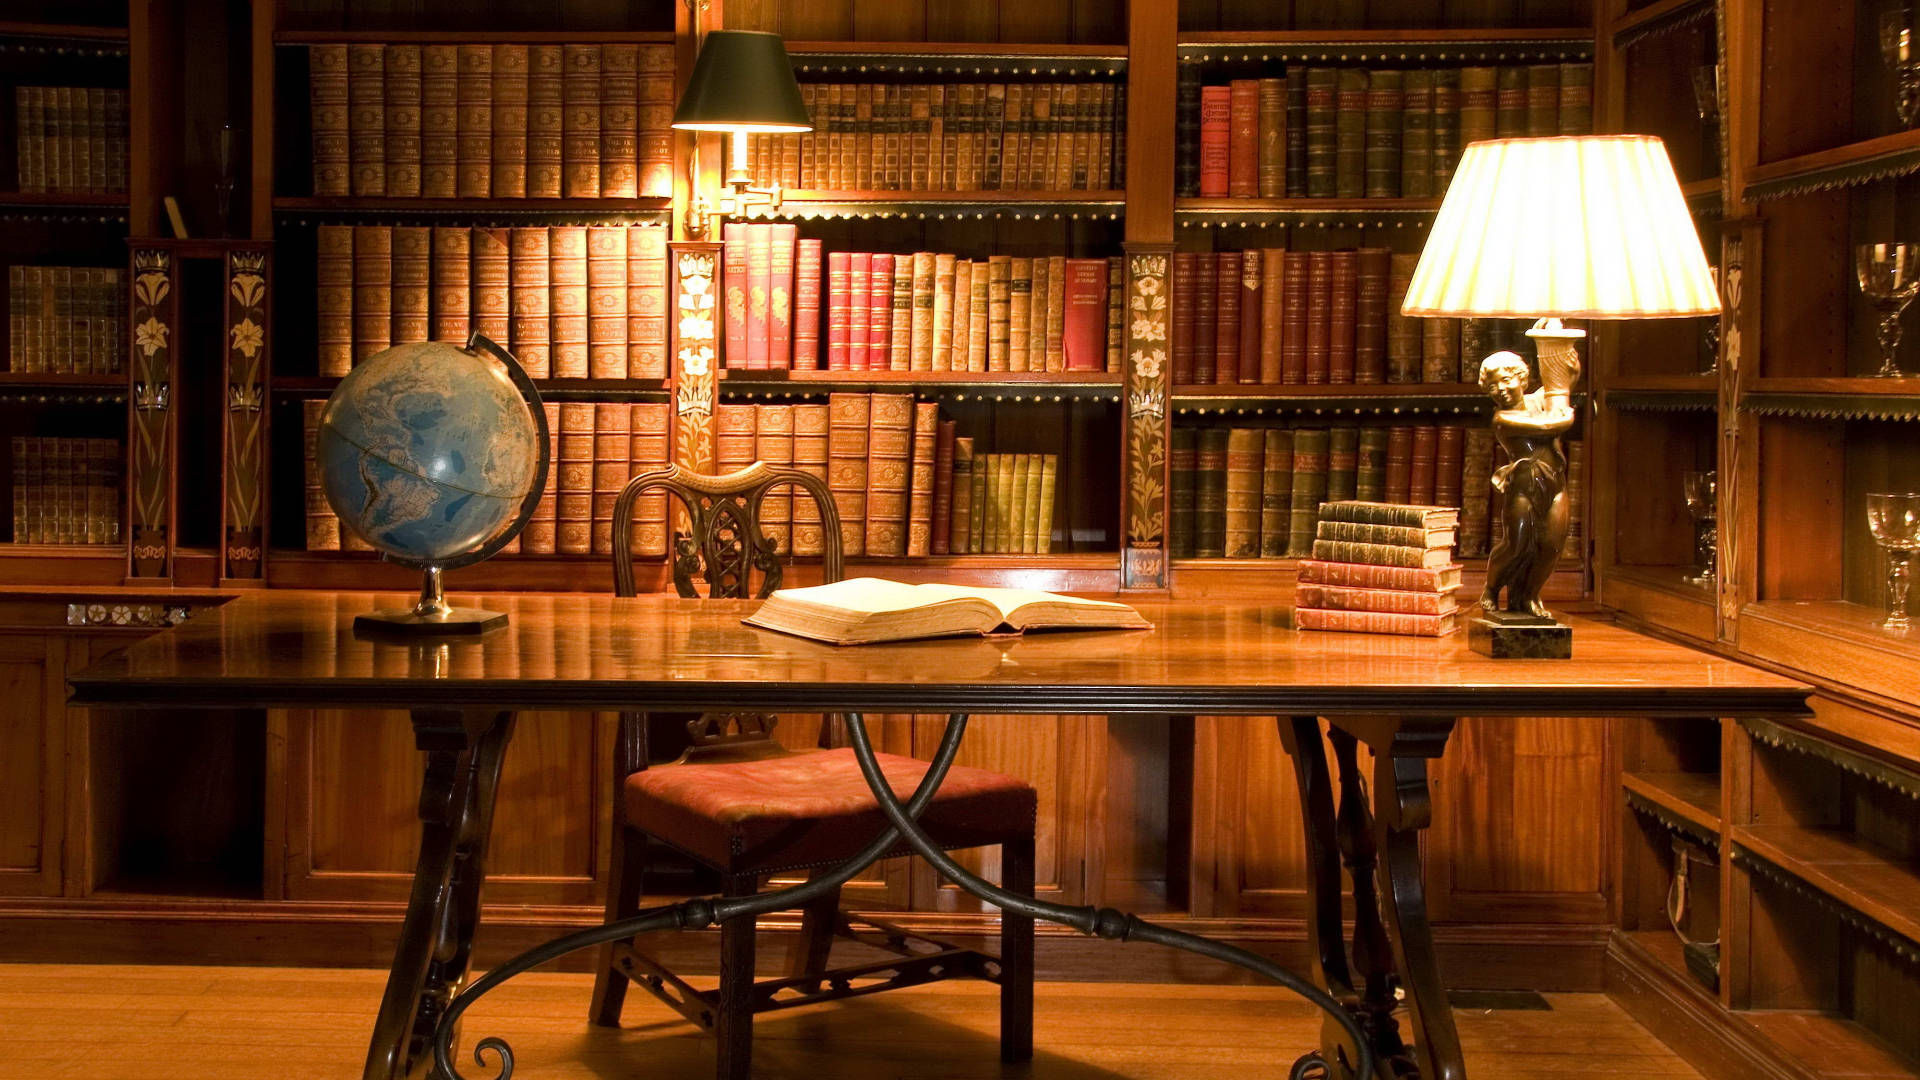 Caption: Traditional Library Desk In An Elegant Setting Background